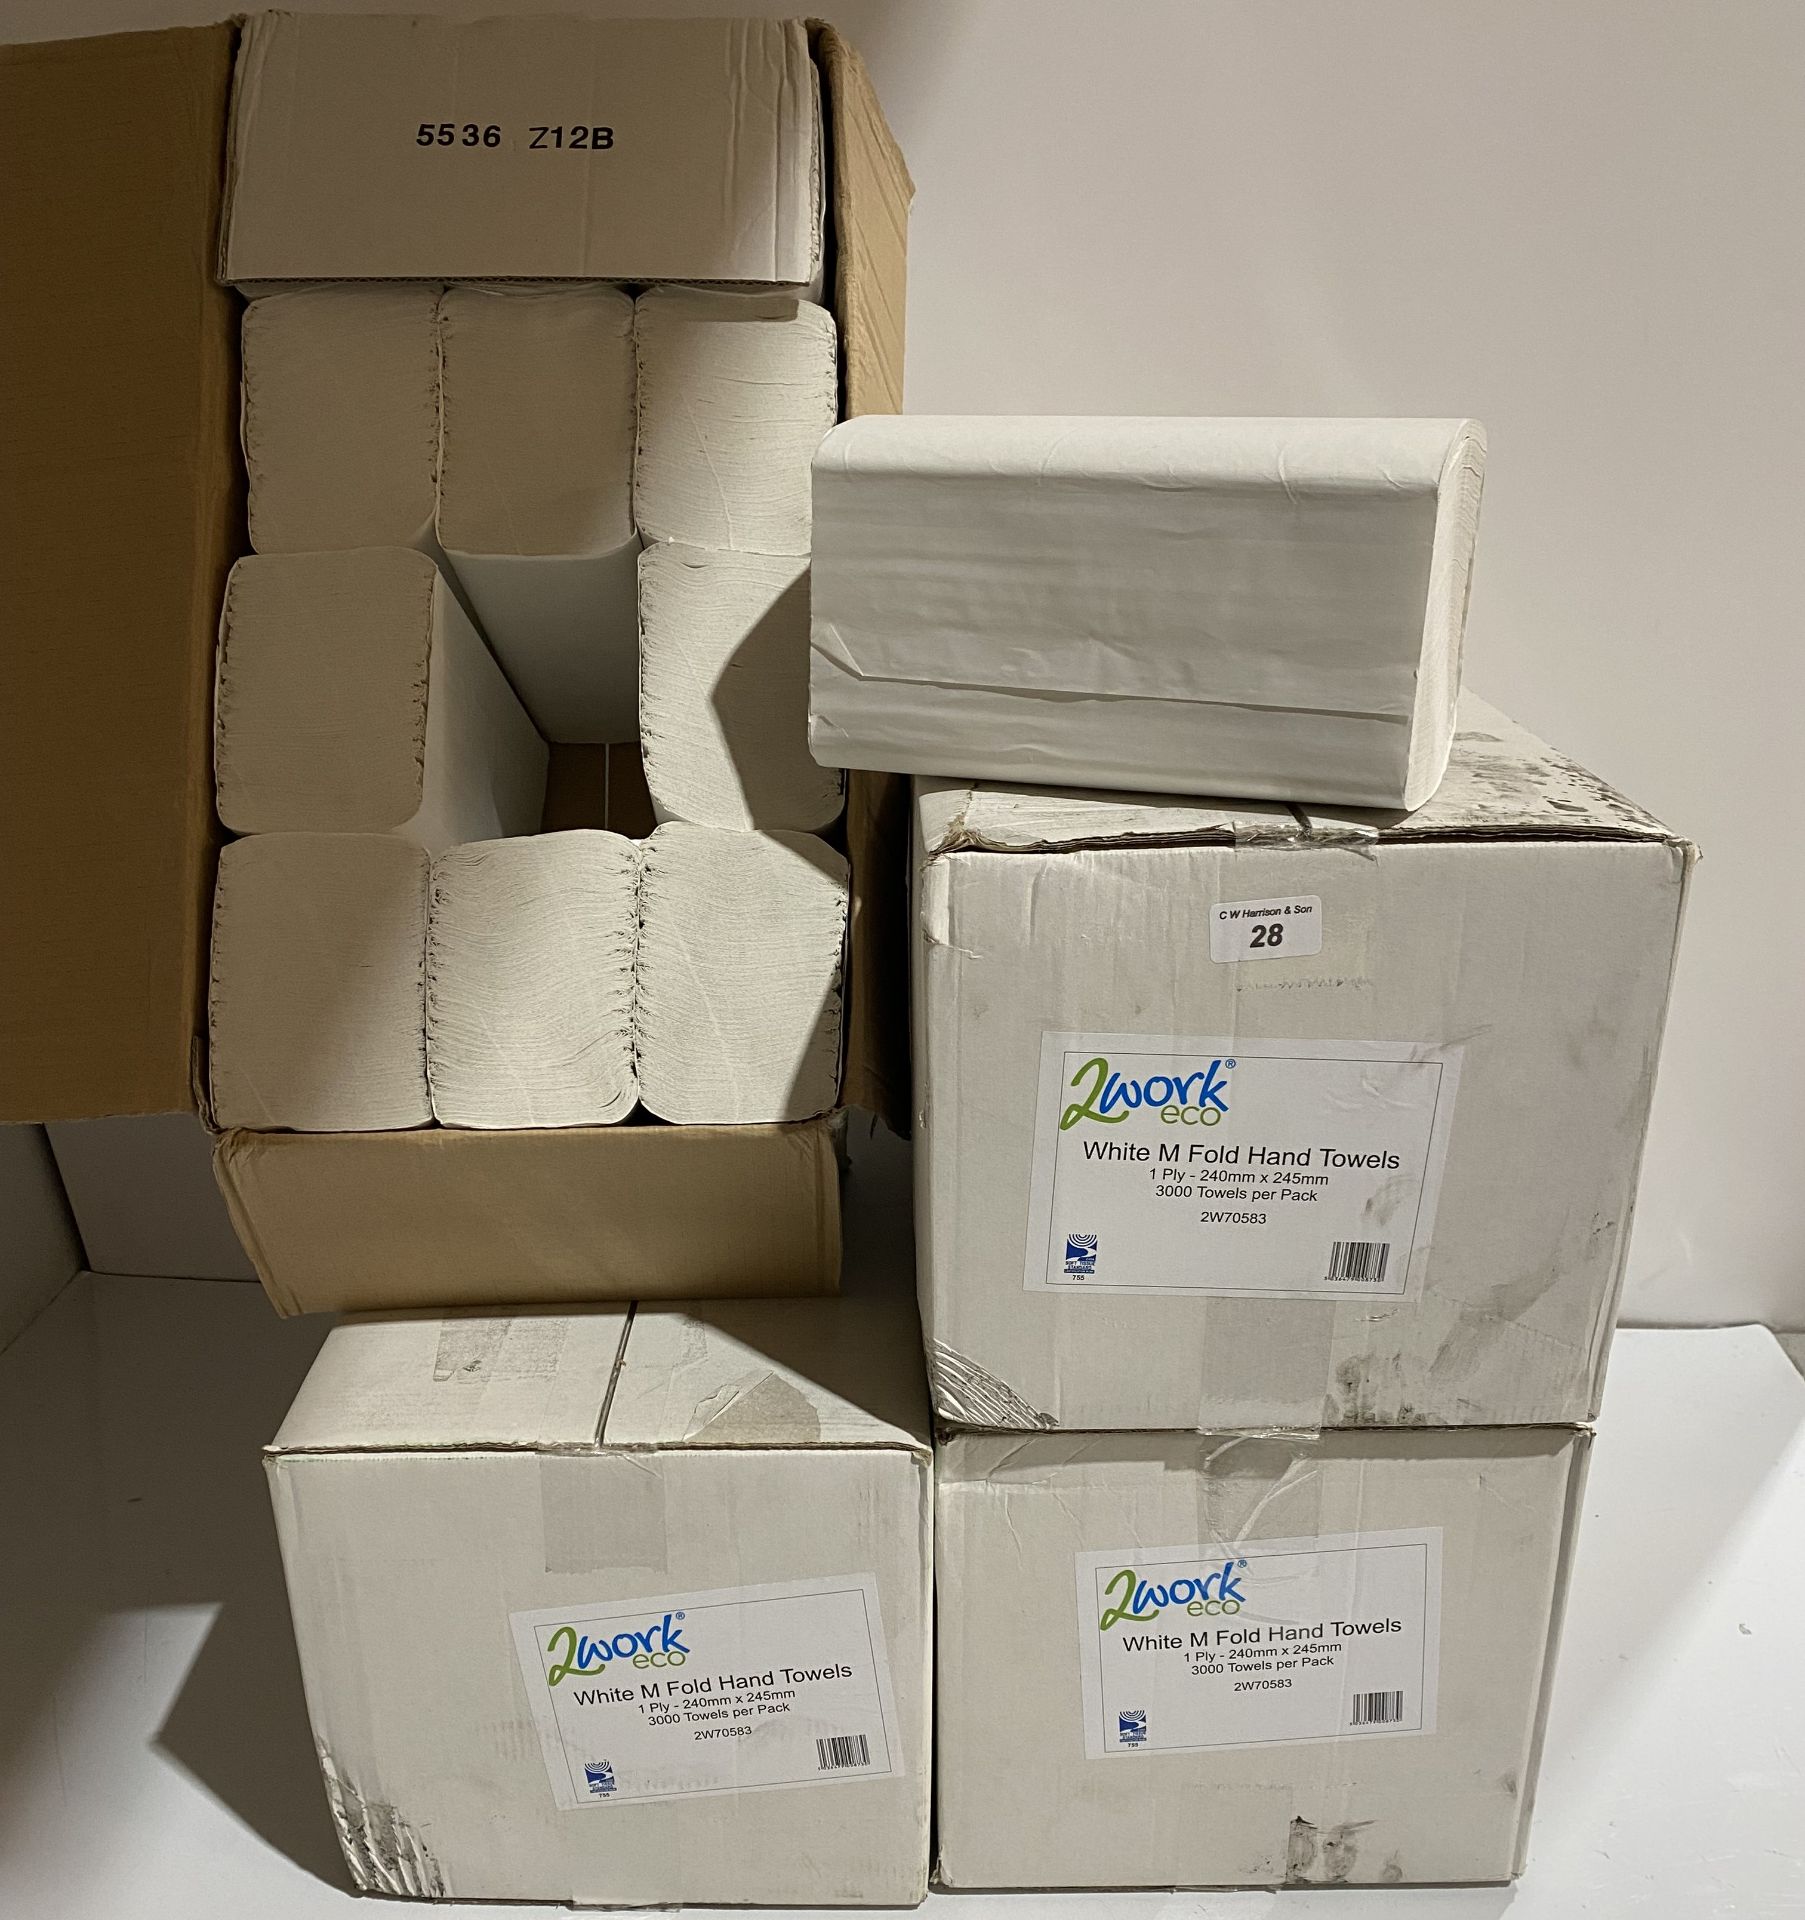 4 x boxes of 2 Work Eco white M fold 1 ply paper hand towels 3000 towels per box (saleroom